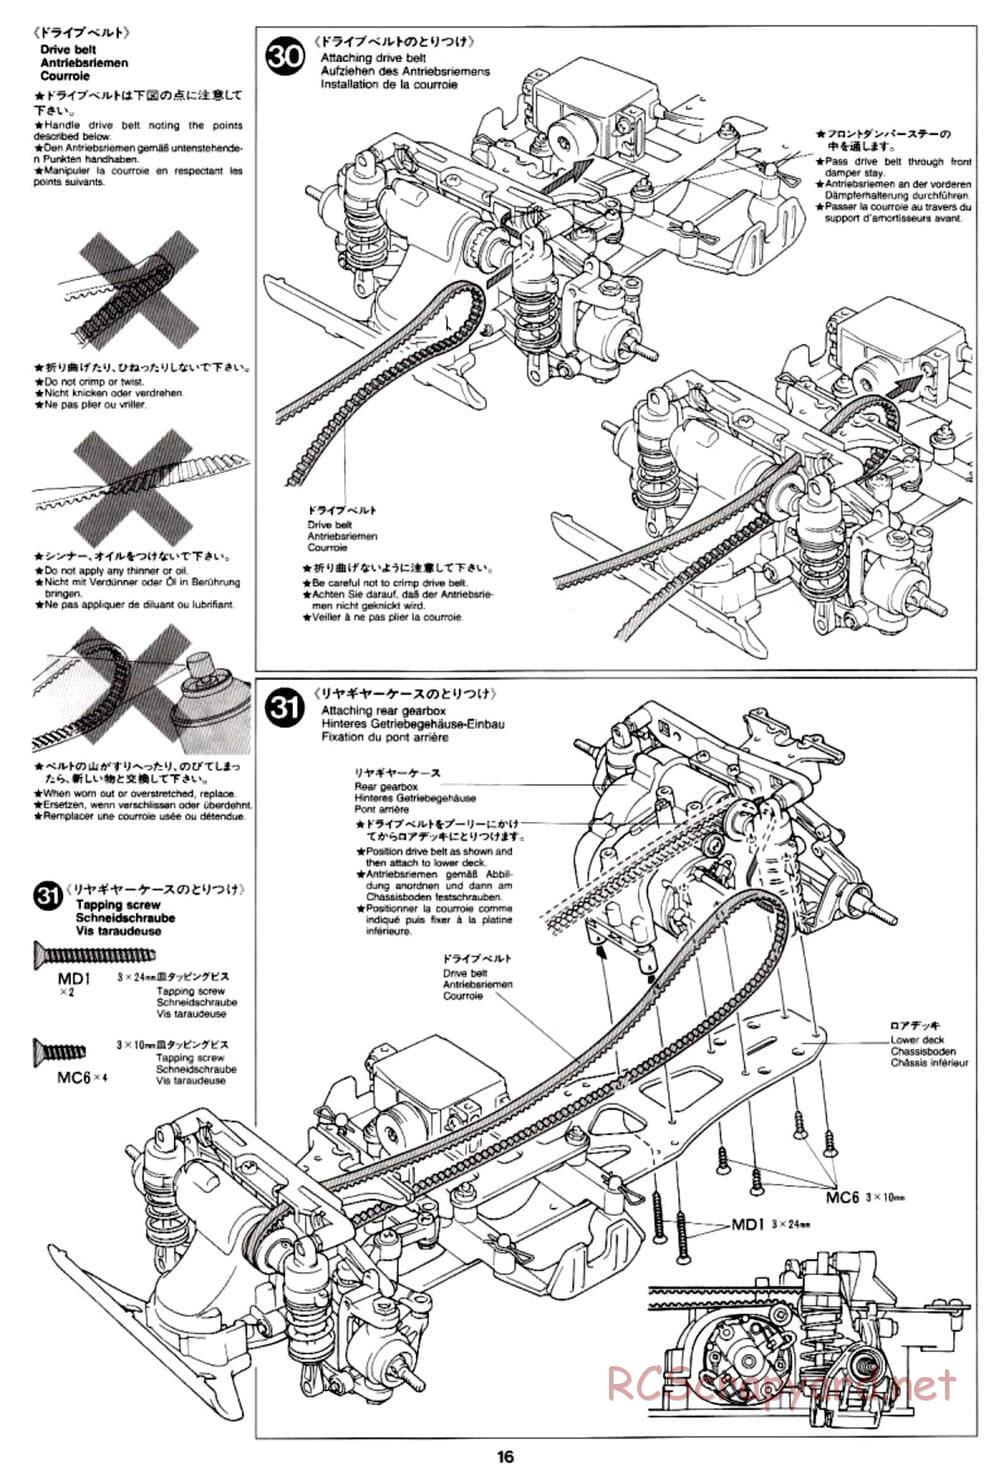 Tamiya - TA-03R TRF Special Edition Chassis - Manual - Page 16